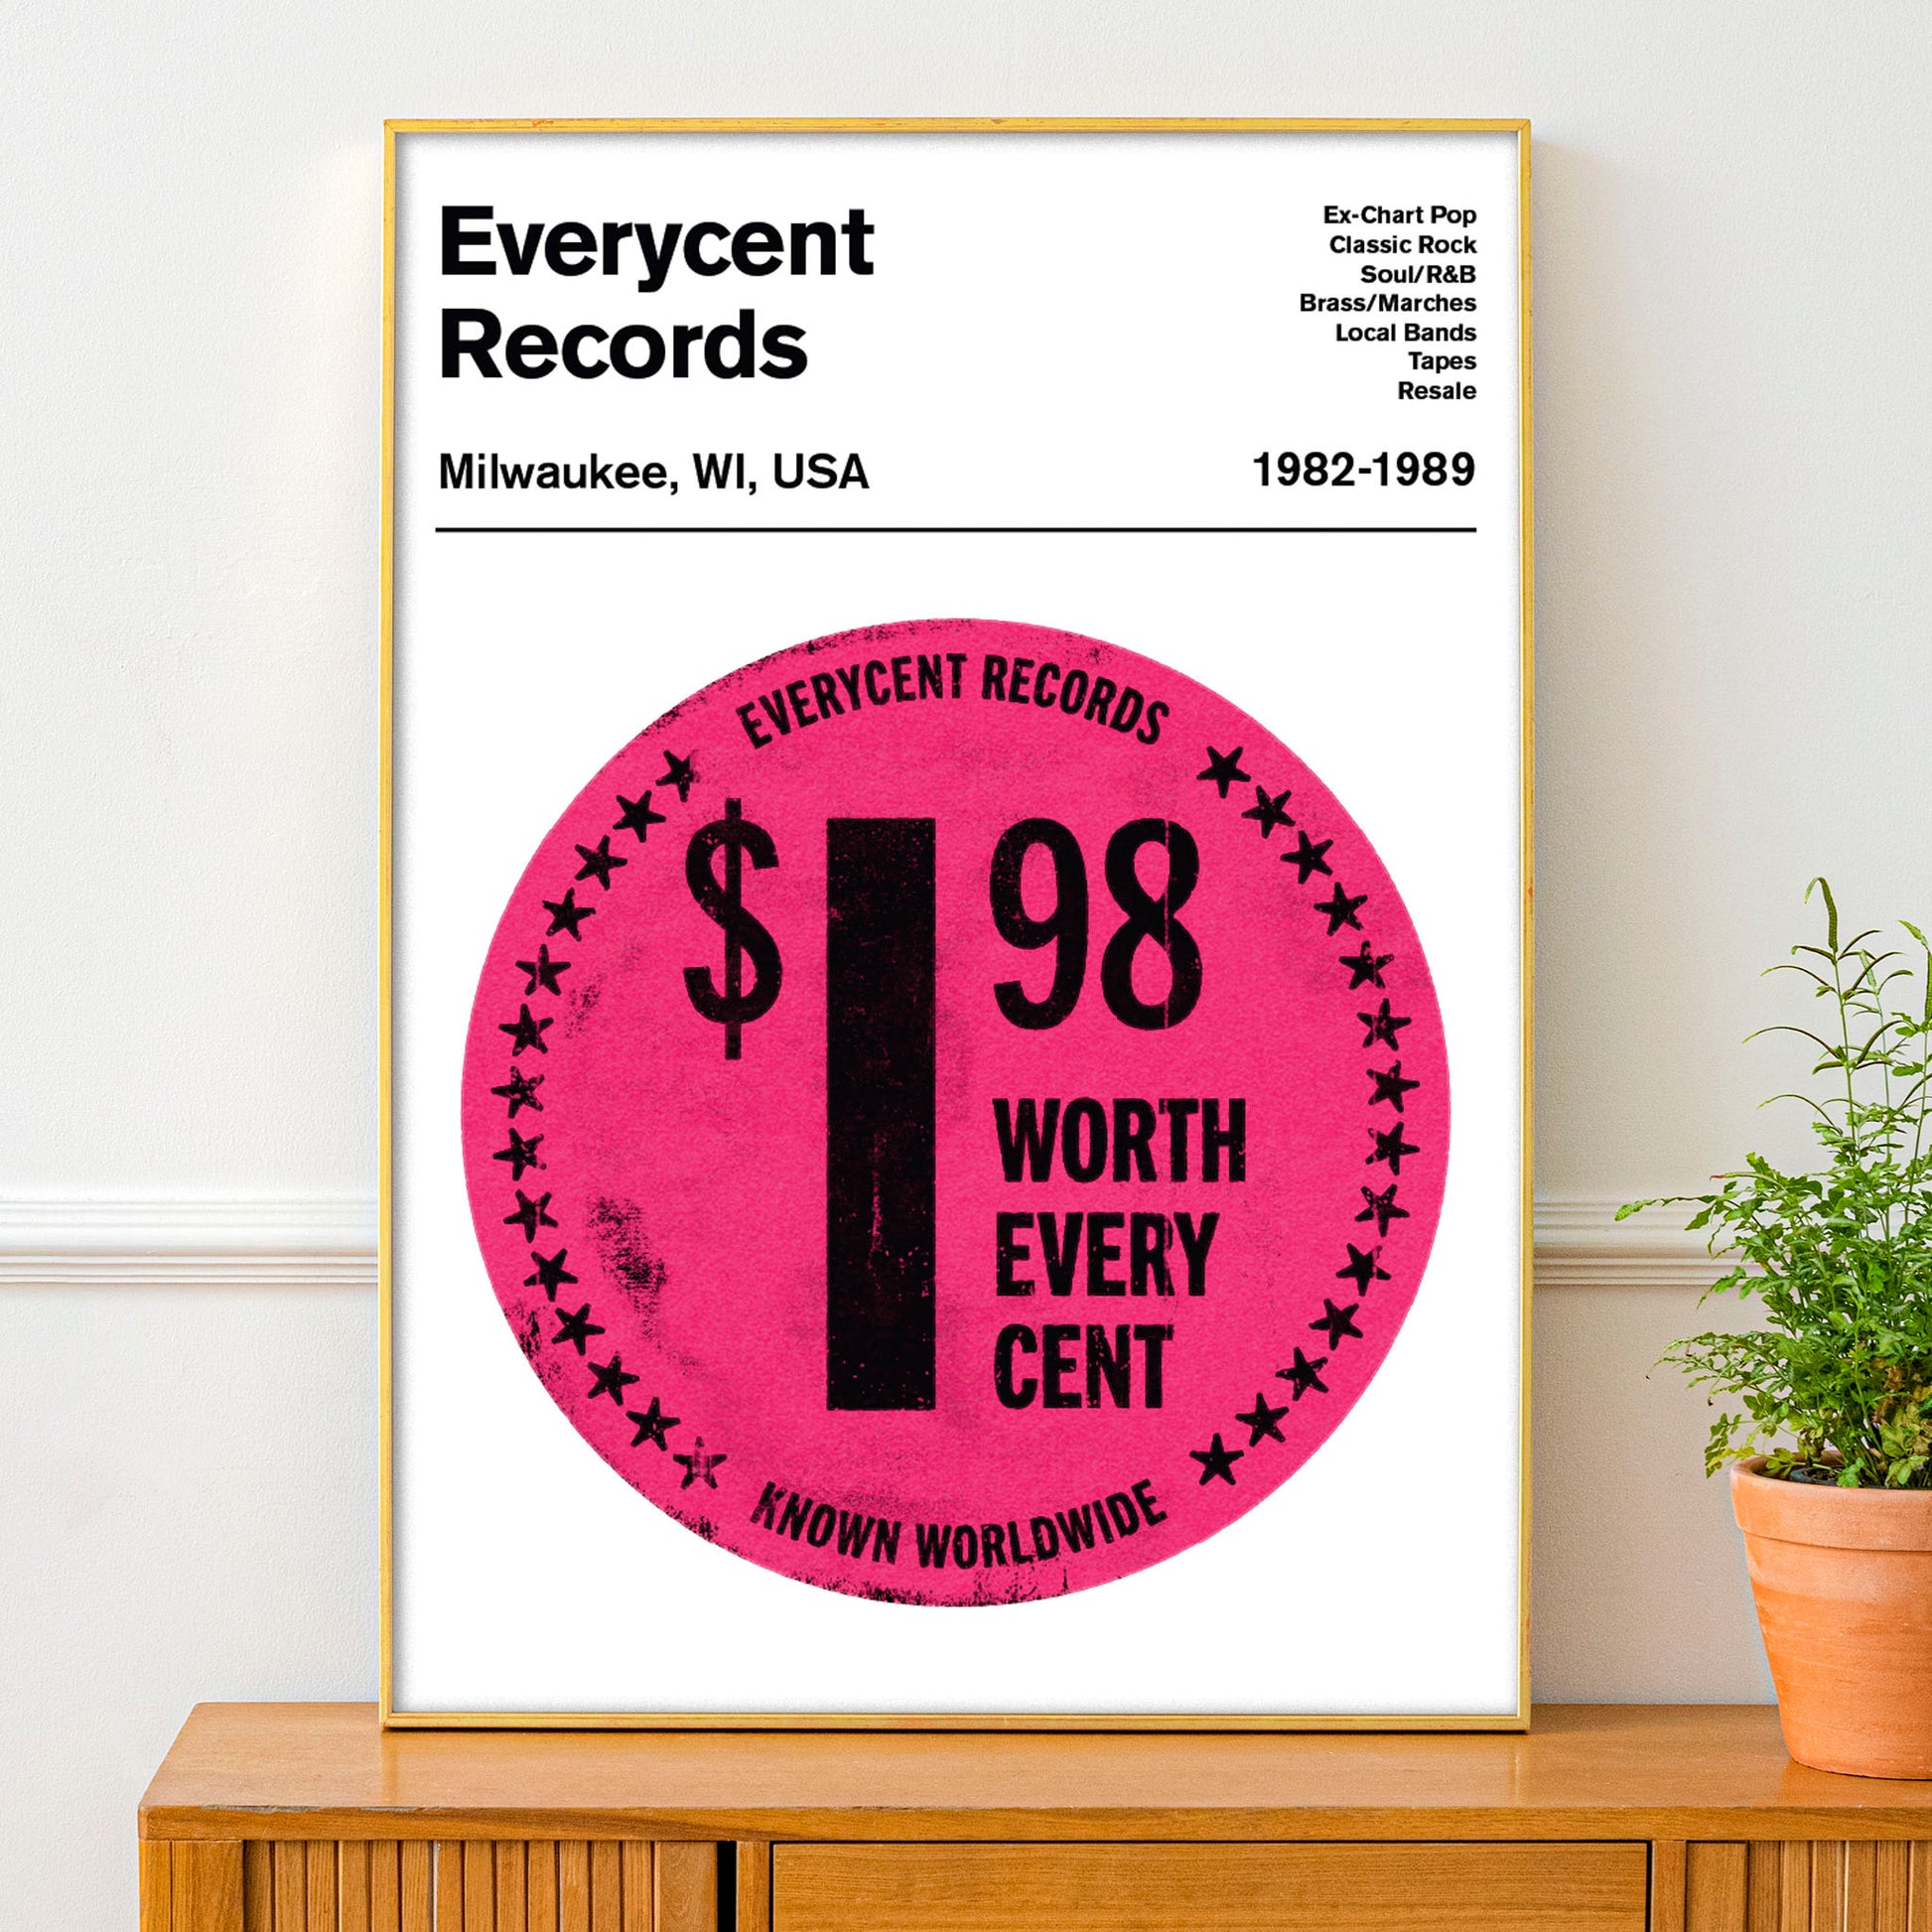 Everycent Records Record Cover Sticker Art Print